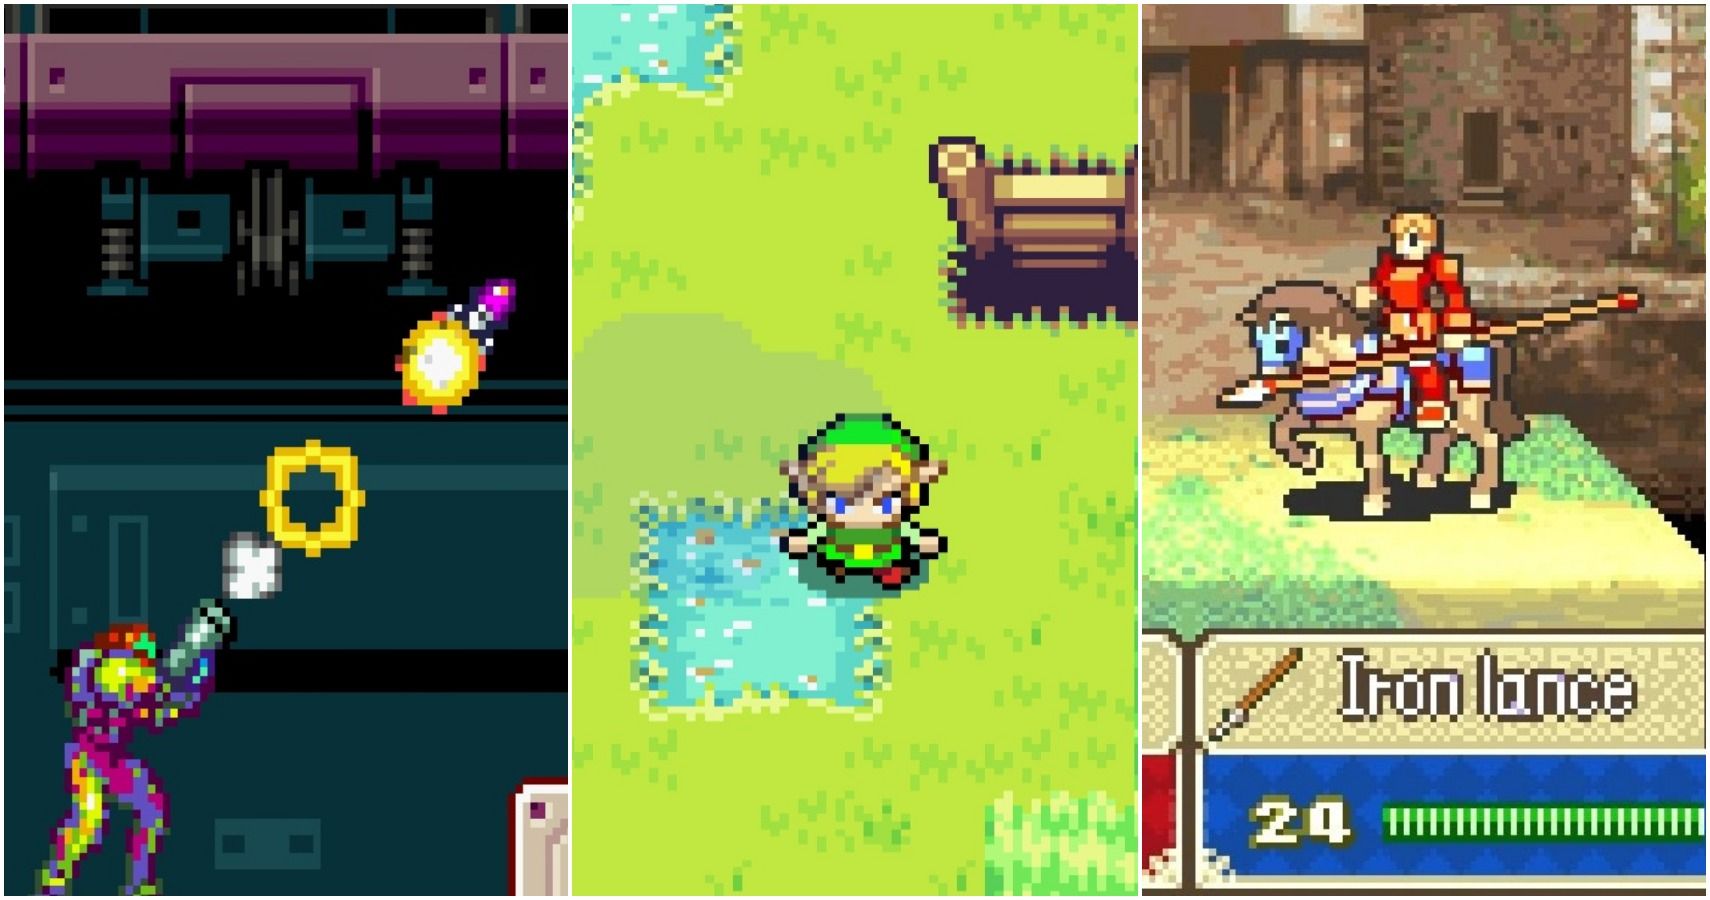 Most Visually Stunning Games On Game Boy Advance